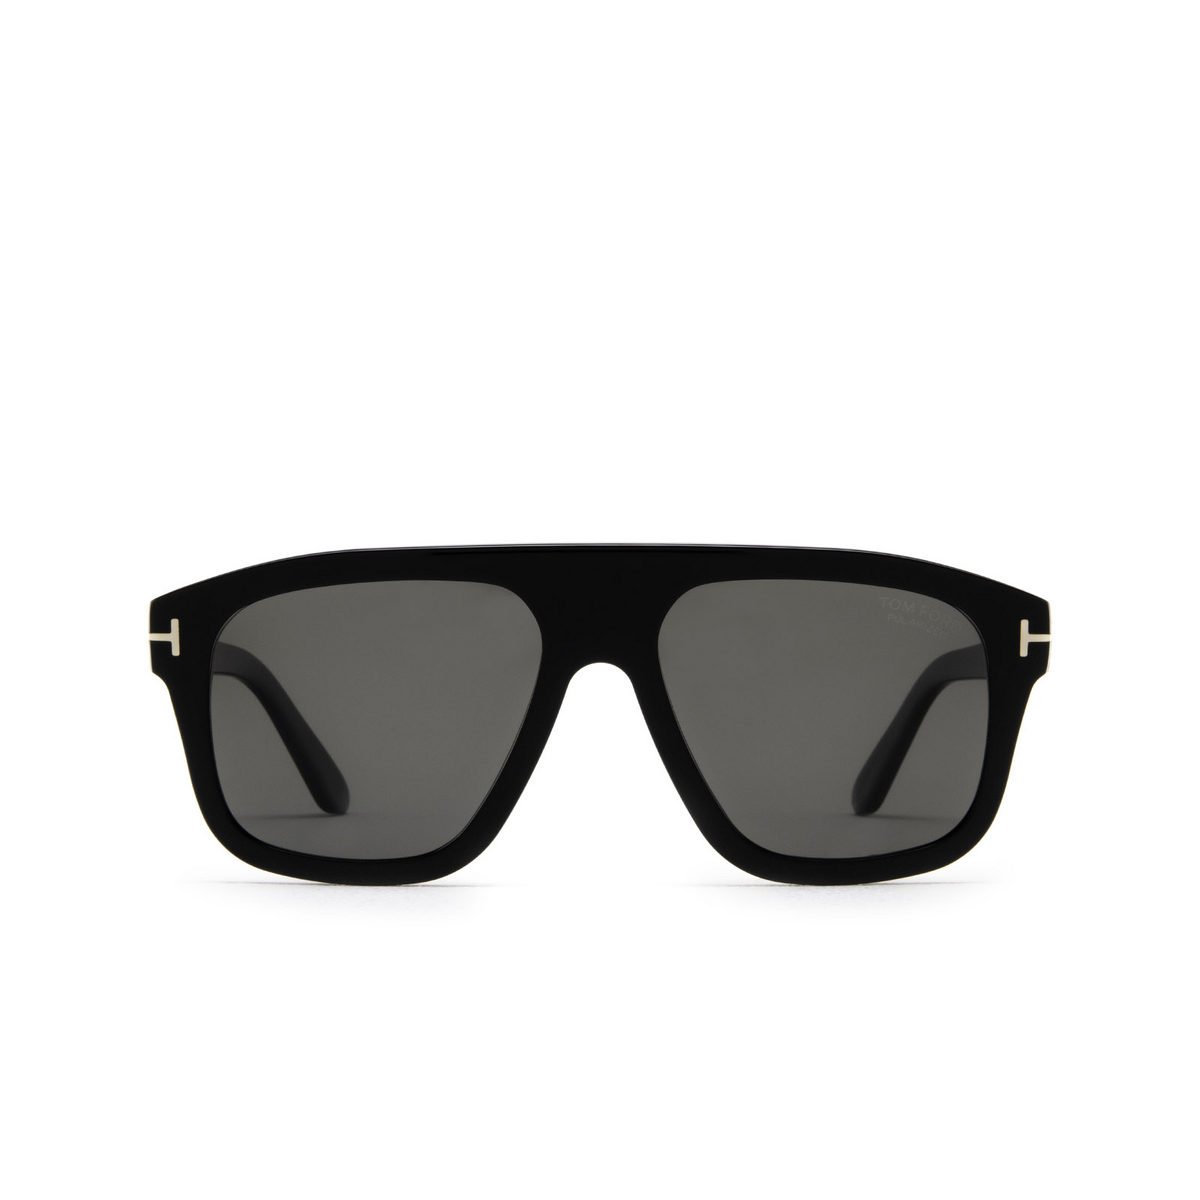 Tom Ford THOR Sunglasses 01D Black - front view